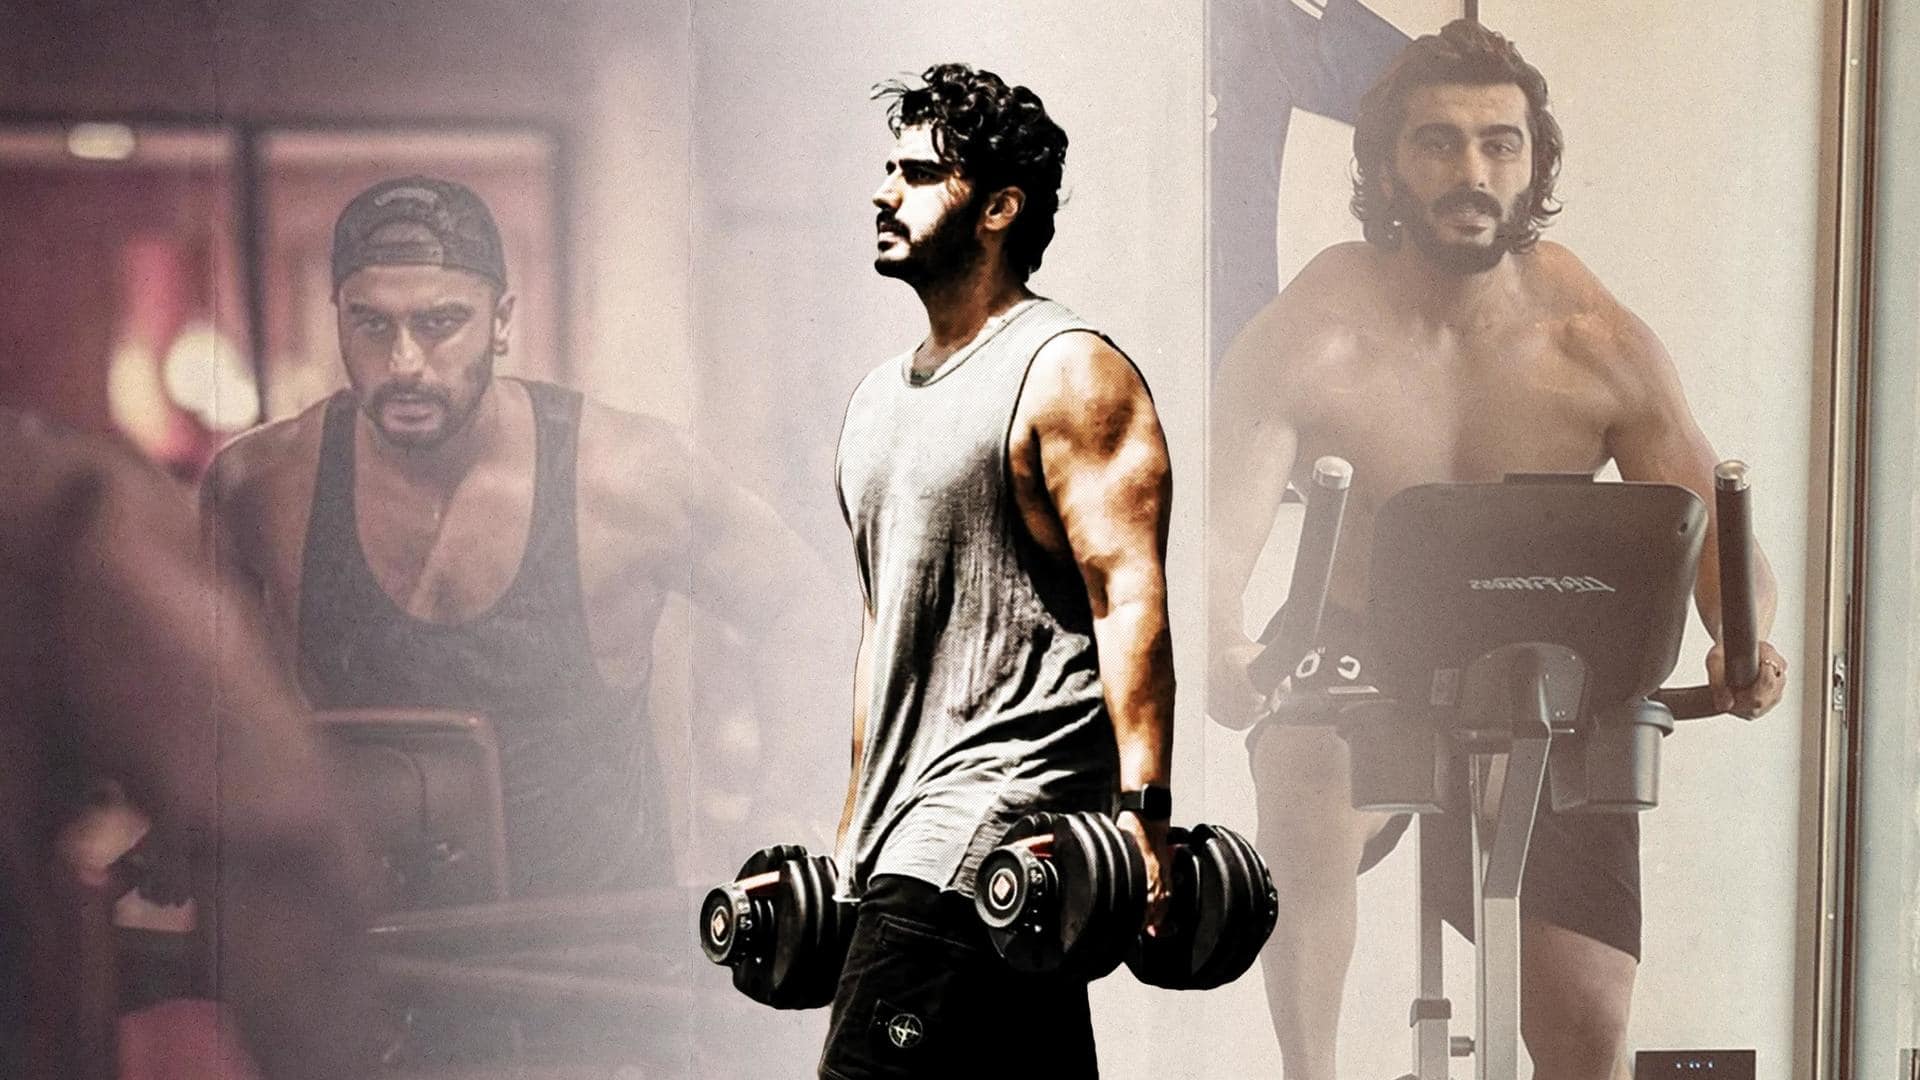 Happy birthday, Arjun Kapoor! Here are his fittest looks ever